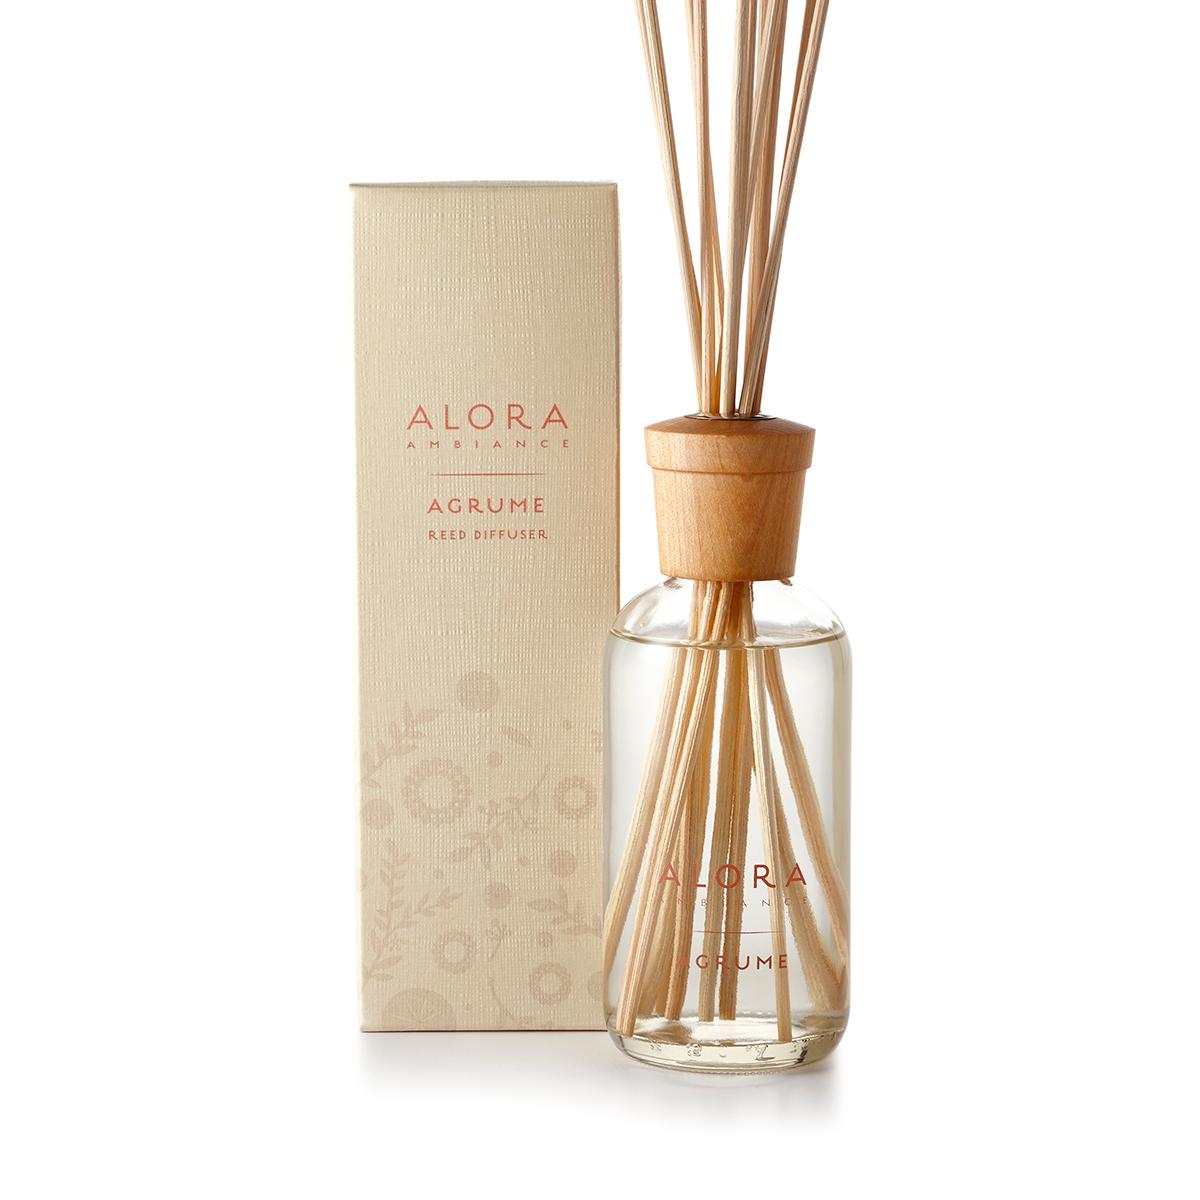 Primary image of Agrume Reed Diffuser